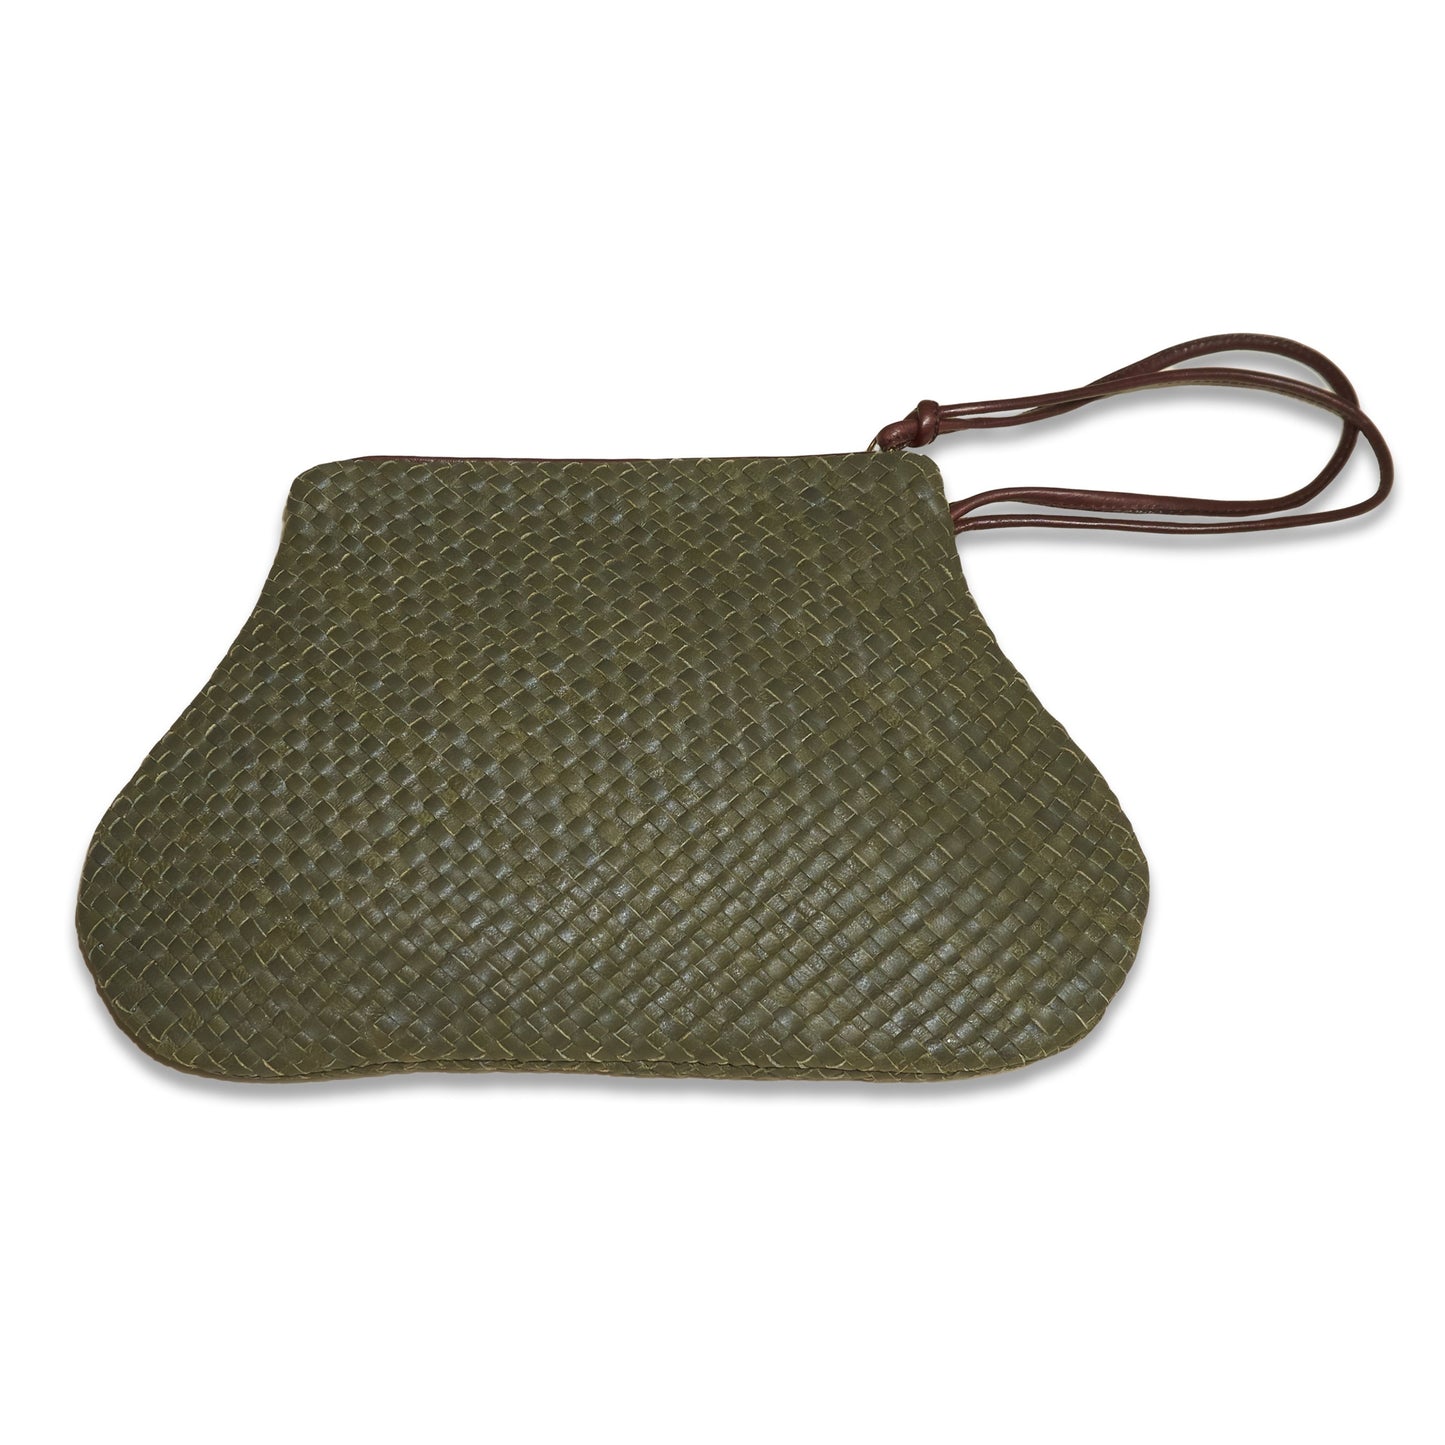 GOURDE POUCH TISSE - Handwoven Leather | Light Olive Green